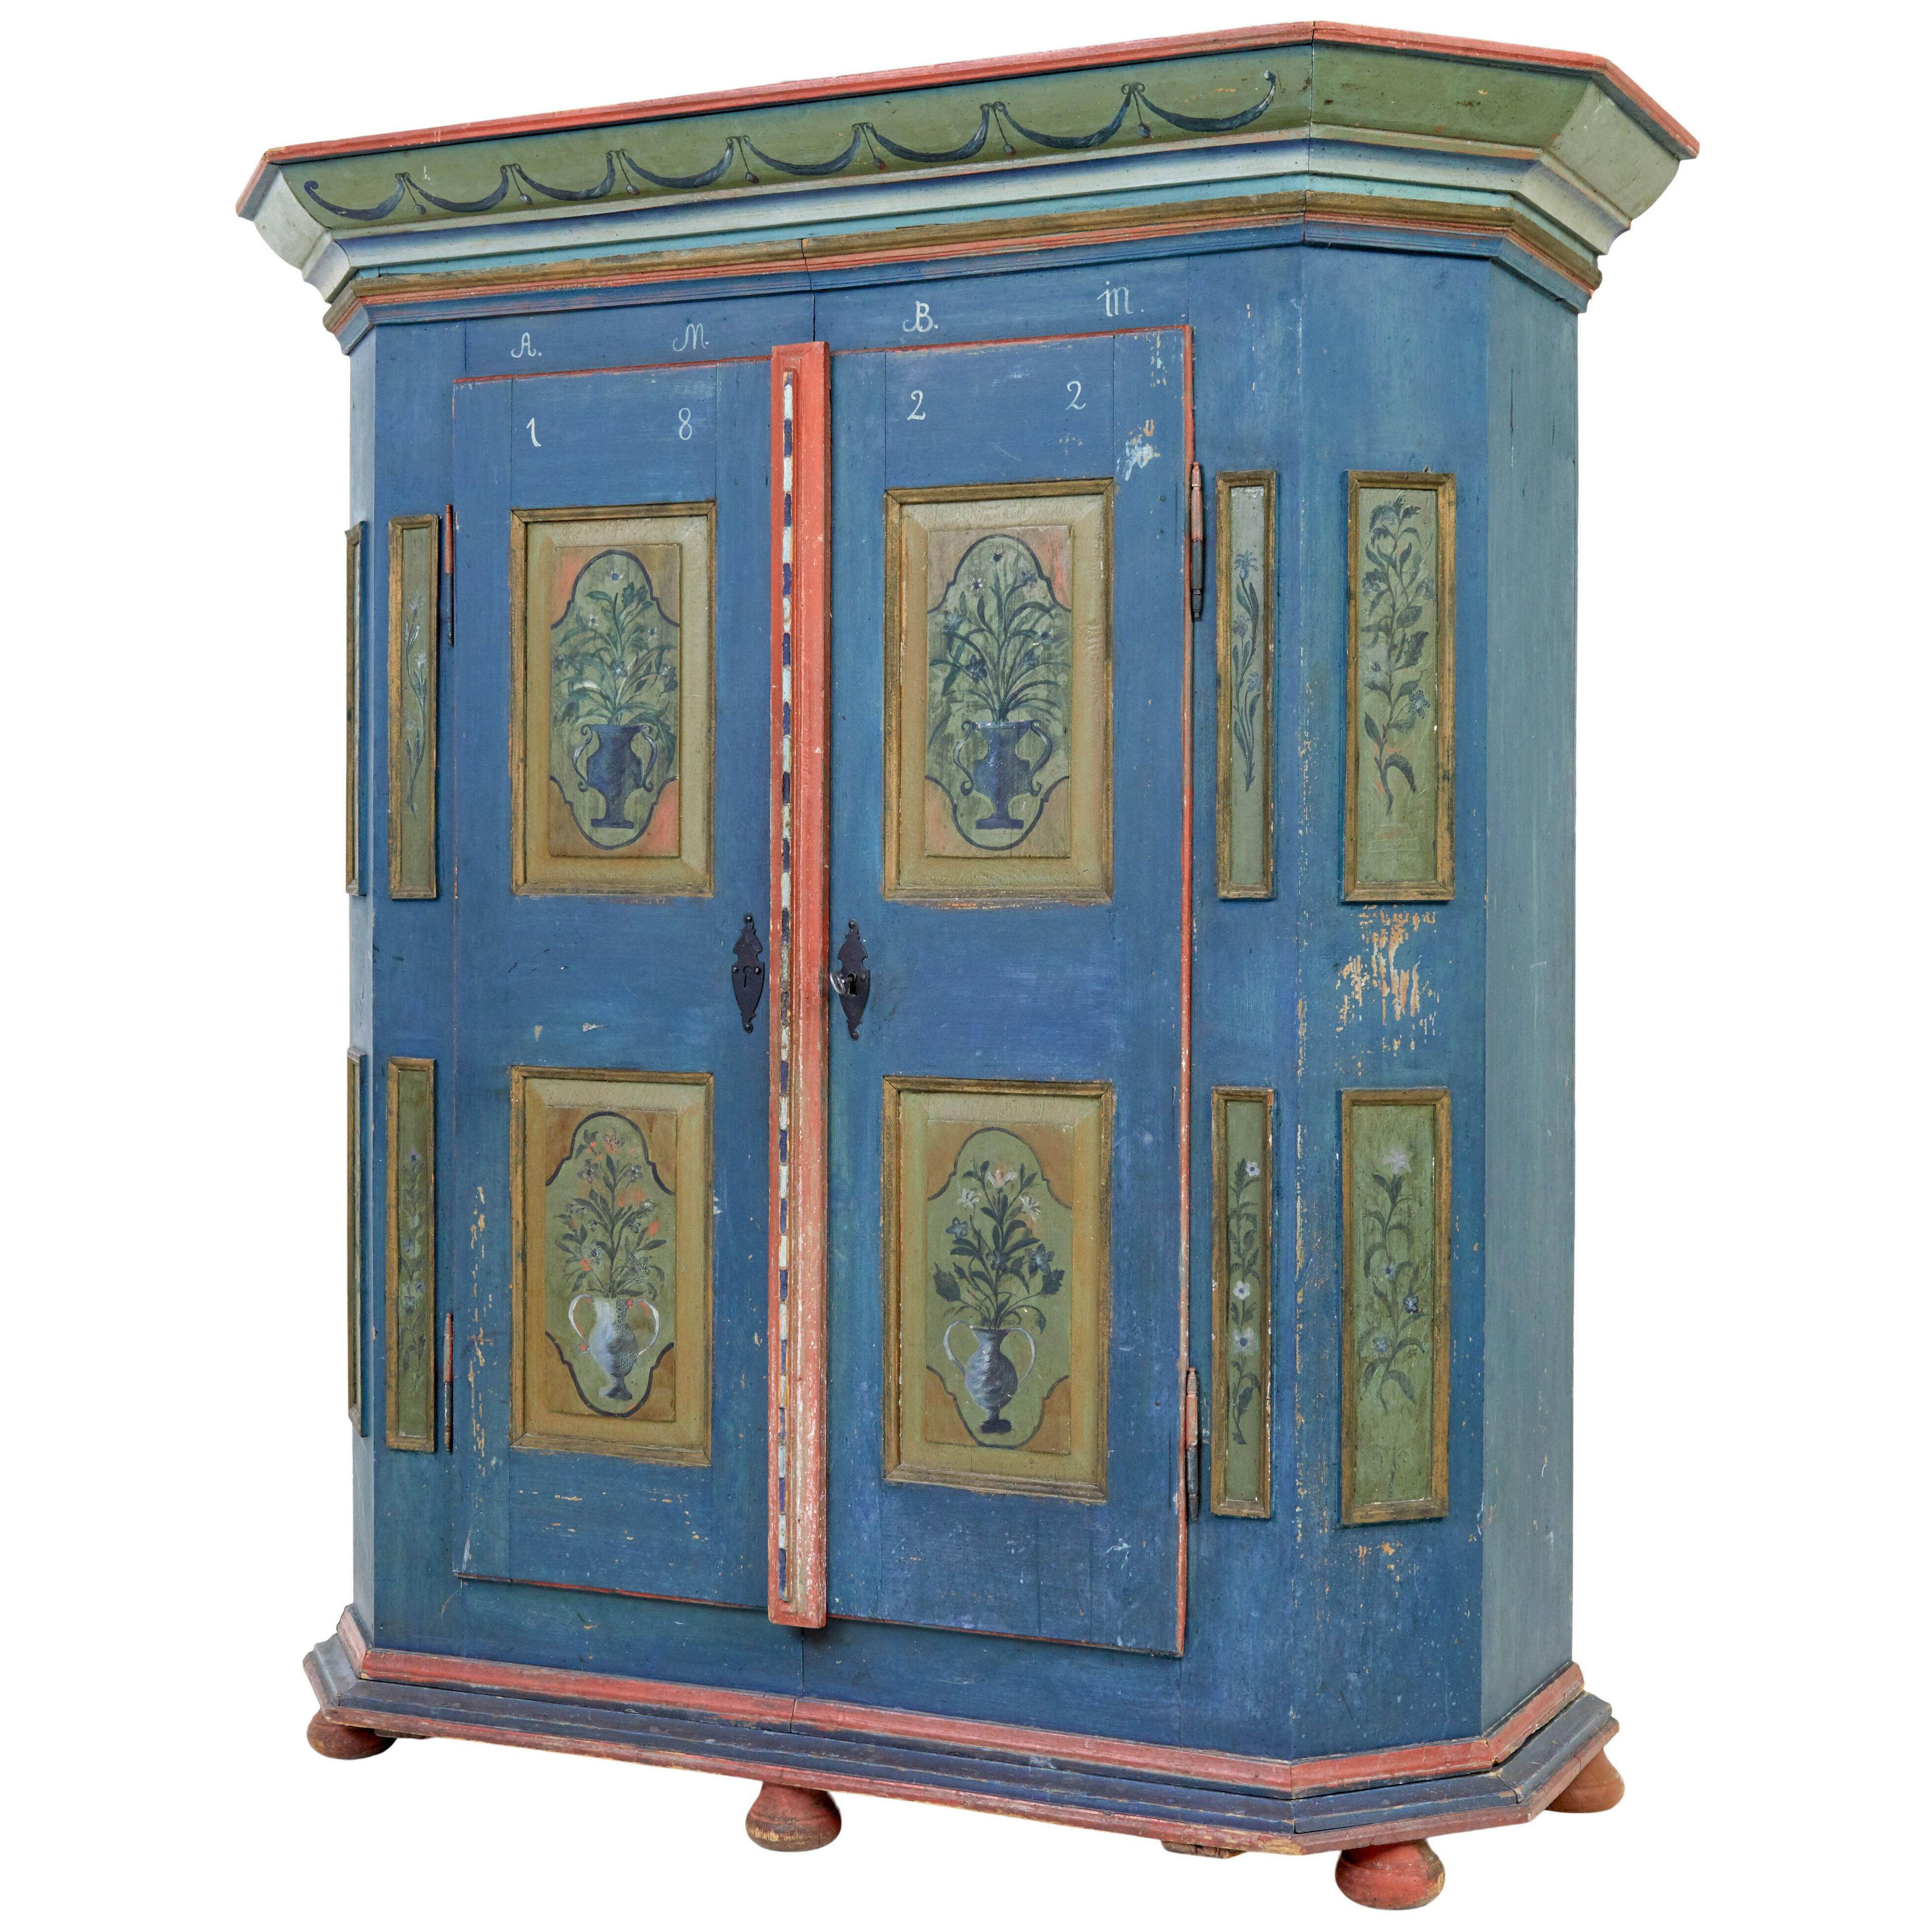 TRADITIONAL SWEDISH HAND PAINTED 19TH CENTURY PAINTED WARDROBE